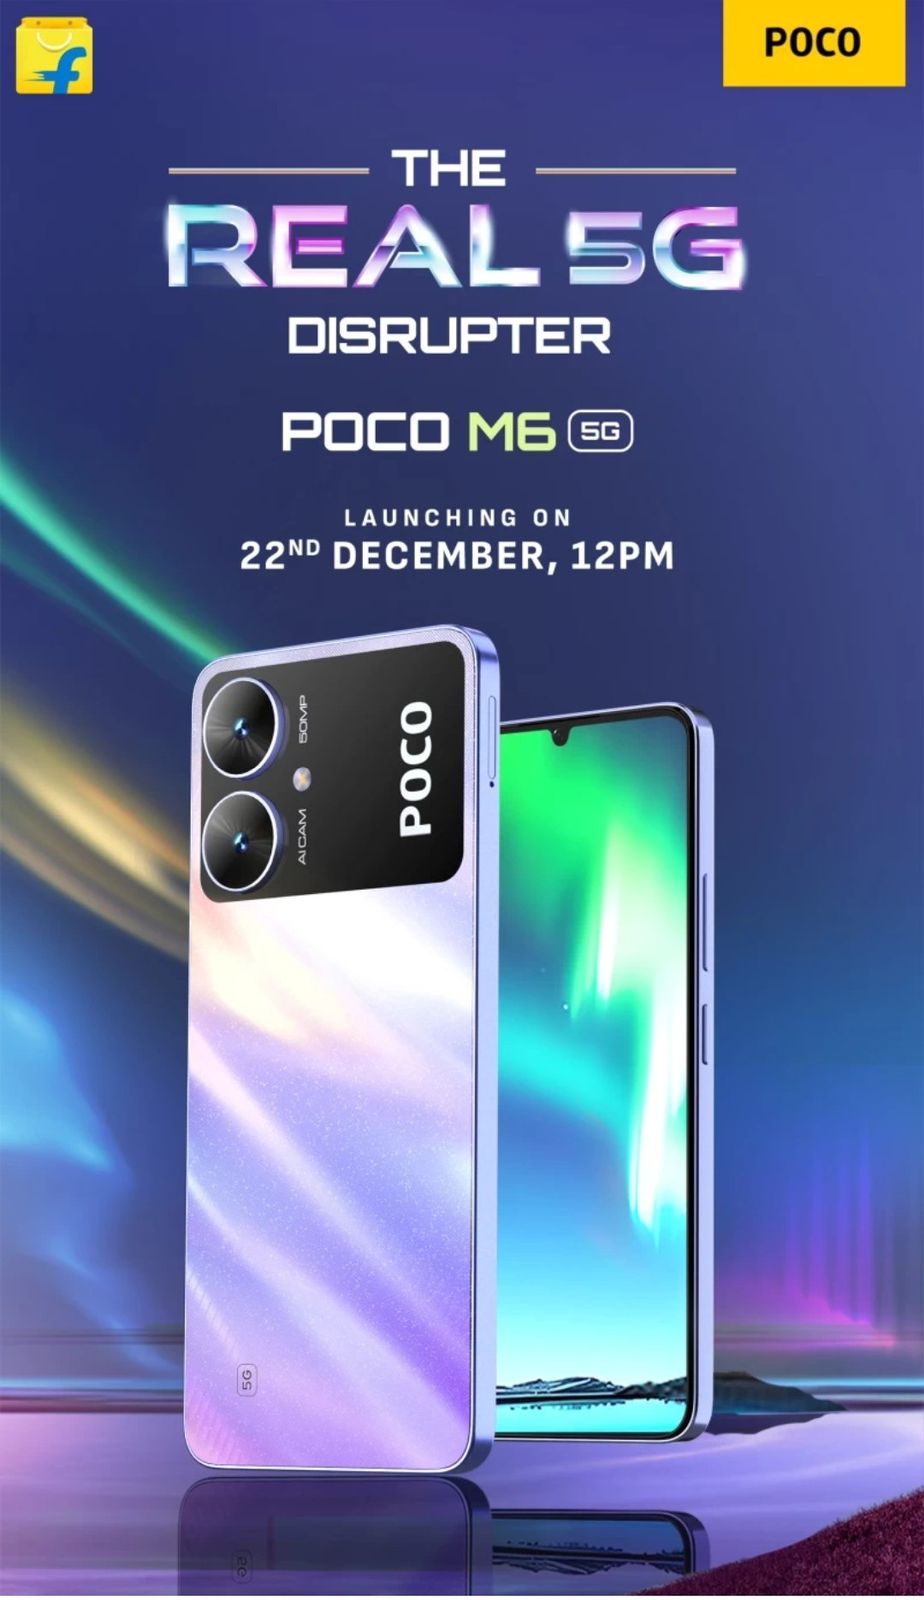 POCO M6 5G: Pricing and Availability